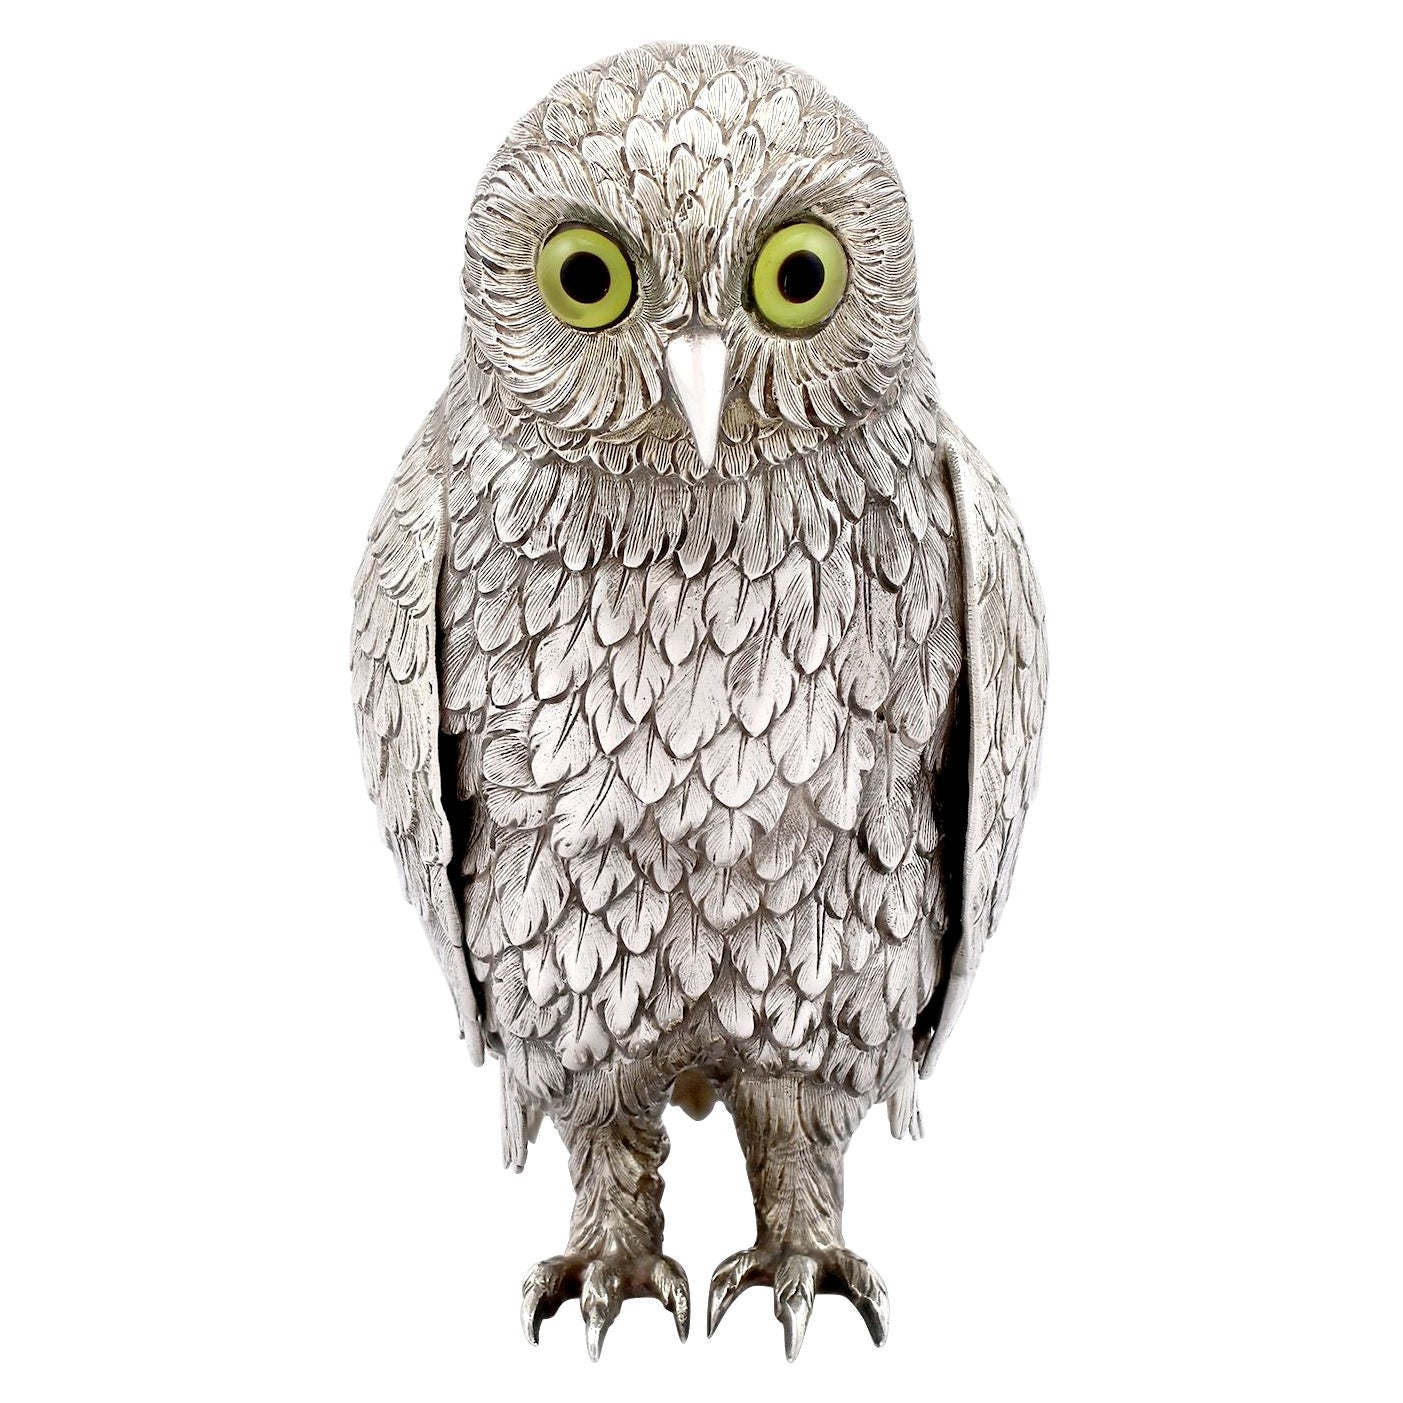 Antique German Sterling Silver Table Owl